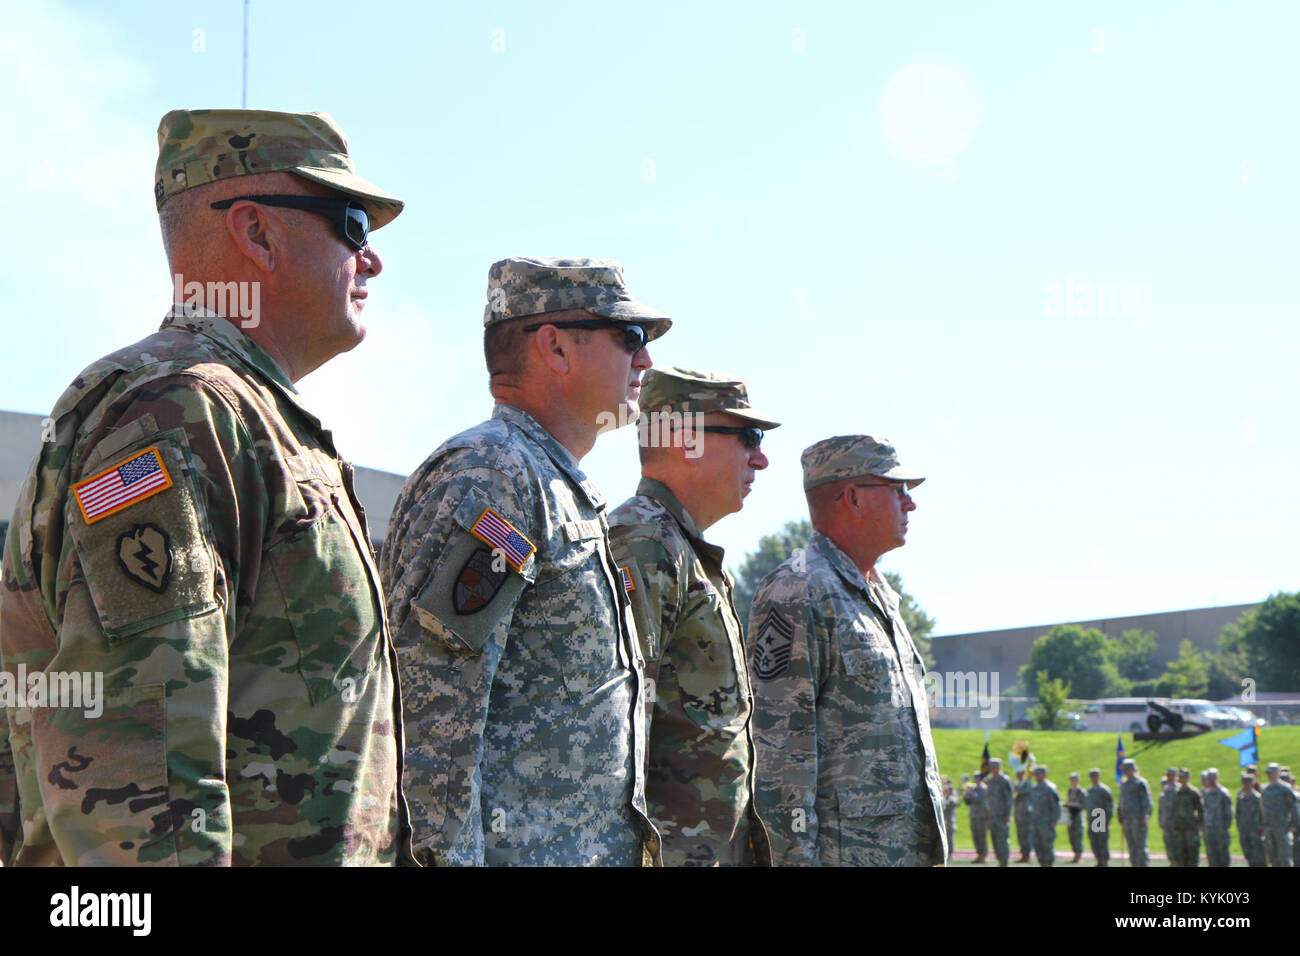 The 149th Maneuver Enhancement Brigade (MEB) conducted a change of command and change of responsibility ceremony at Roy Kidd Stadium on Eastern Kentucky University's campus in Richmond, Ky. July 17, 2016. Col. Alexander C. Stewart accepted the colors from Col. Jerry L. Morrison and Command Sgt. Major Marshall P. Ware assumed responsibility from Command Sgt. Major Jesse S. Withers. Both Col. Morrison and CSM Withers served in their positions for the last 2 and a half years. (U.S. Army National Guard photo by Maj. Stephen Martin) Stock Photo